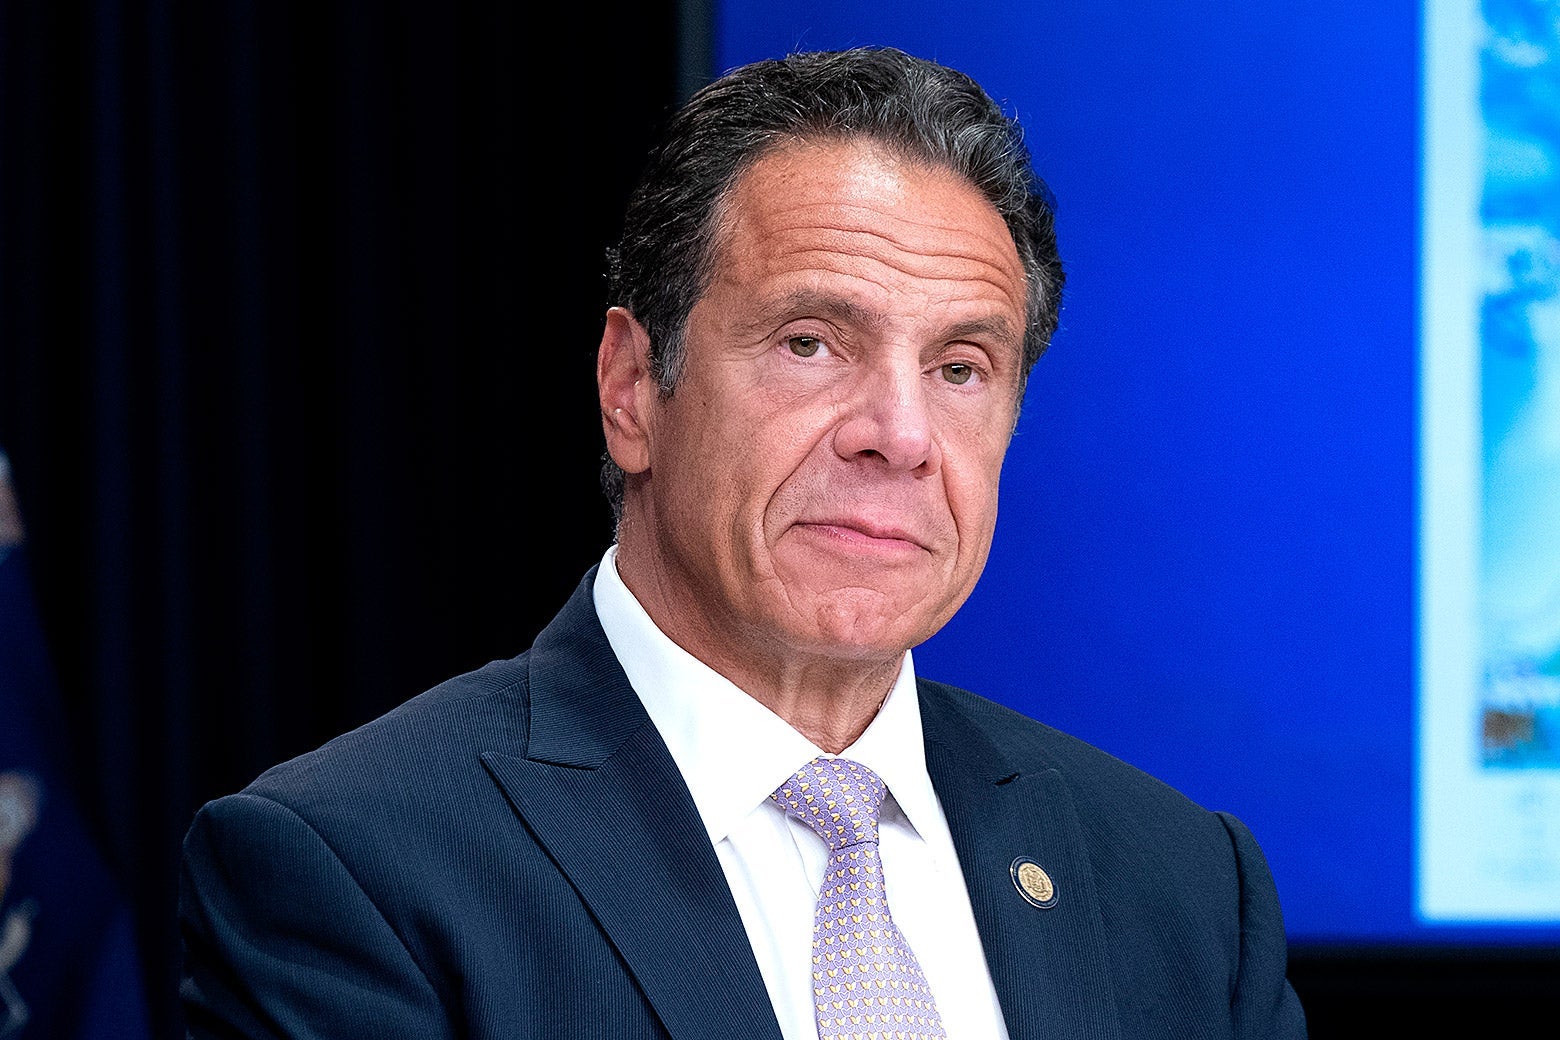 New York State Governor Andrew Cuomo sitting at a table with a serious expression while holding a media briefing.